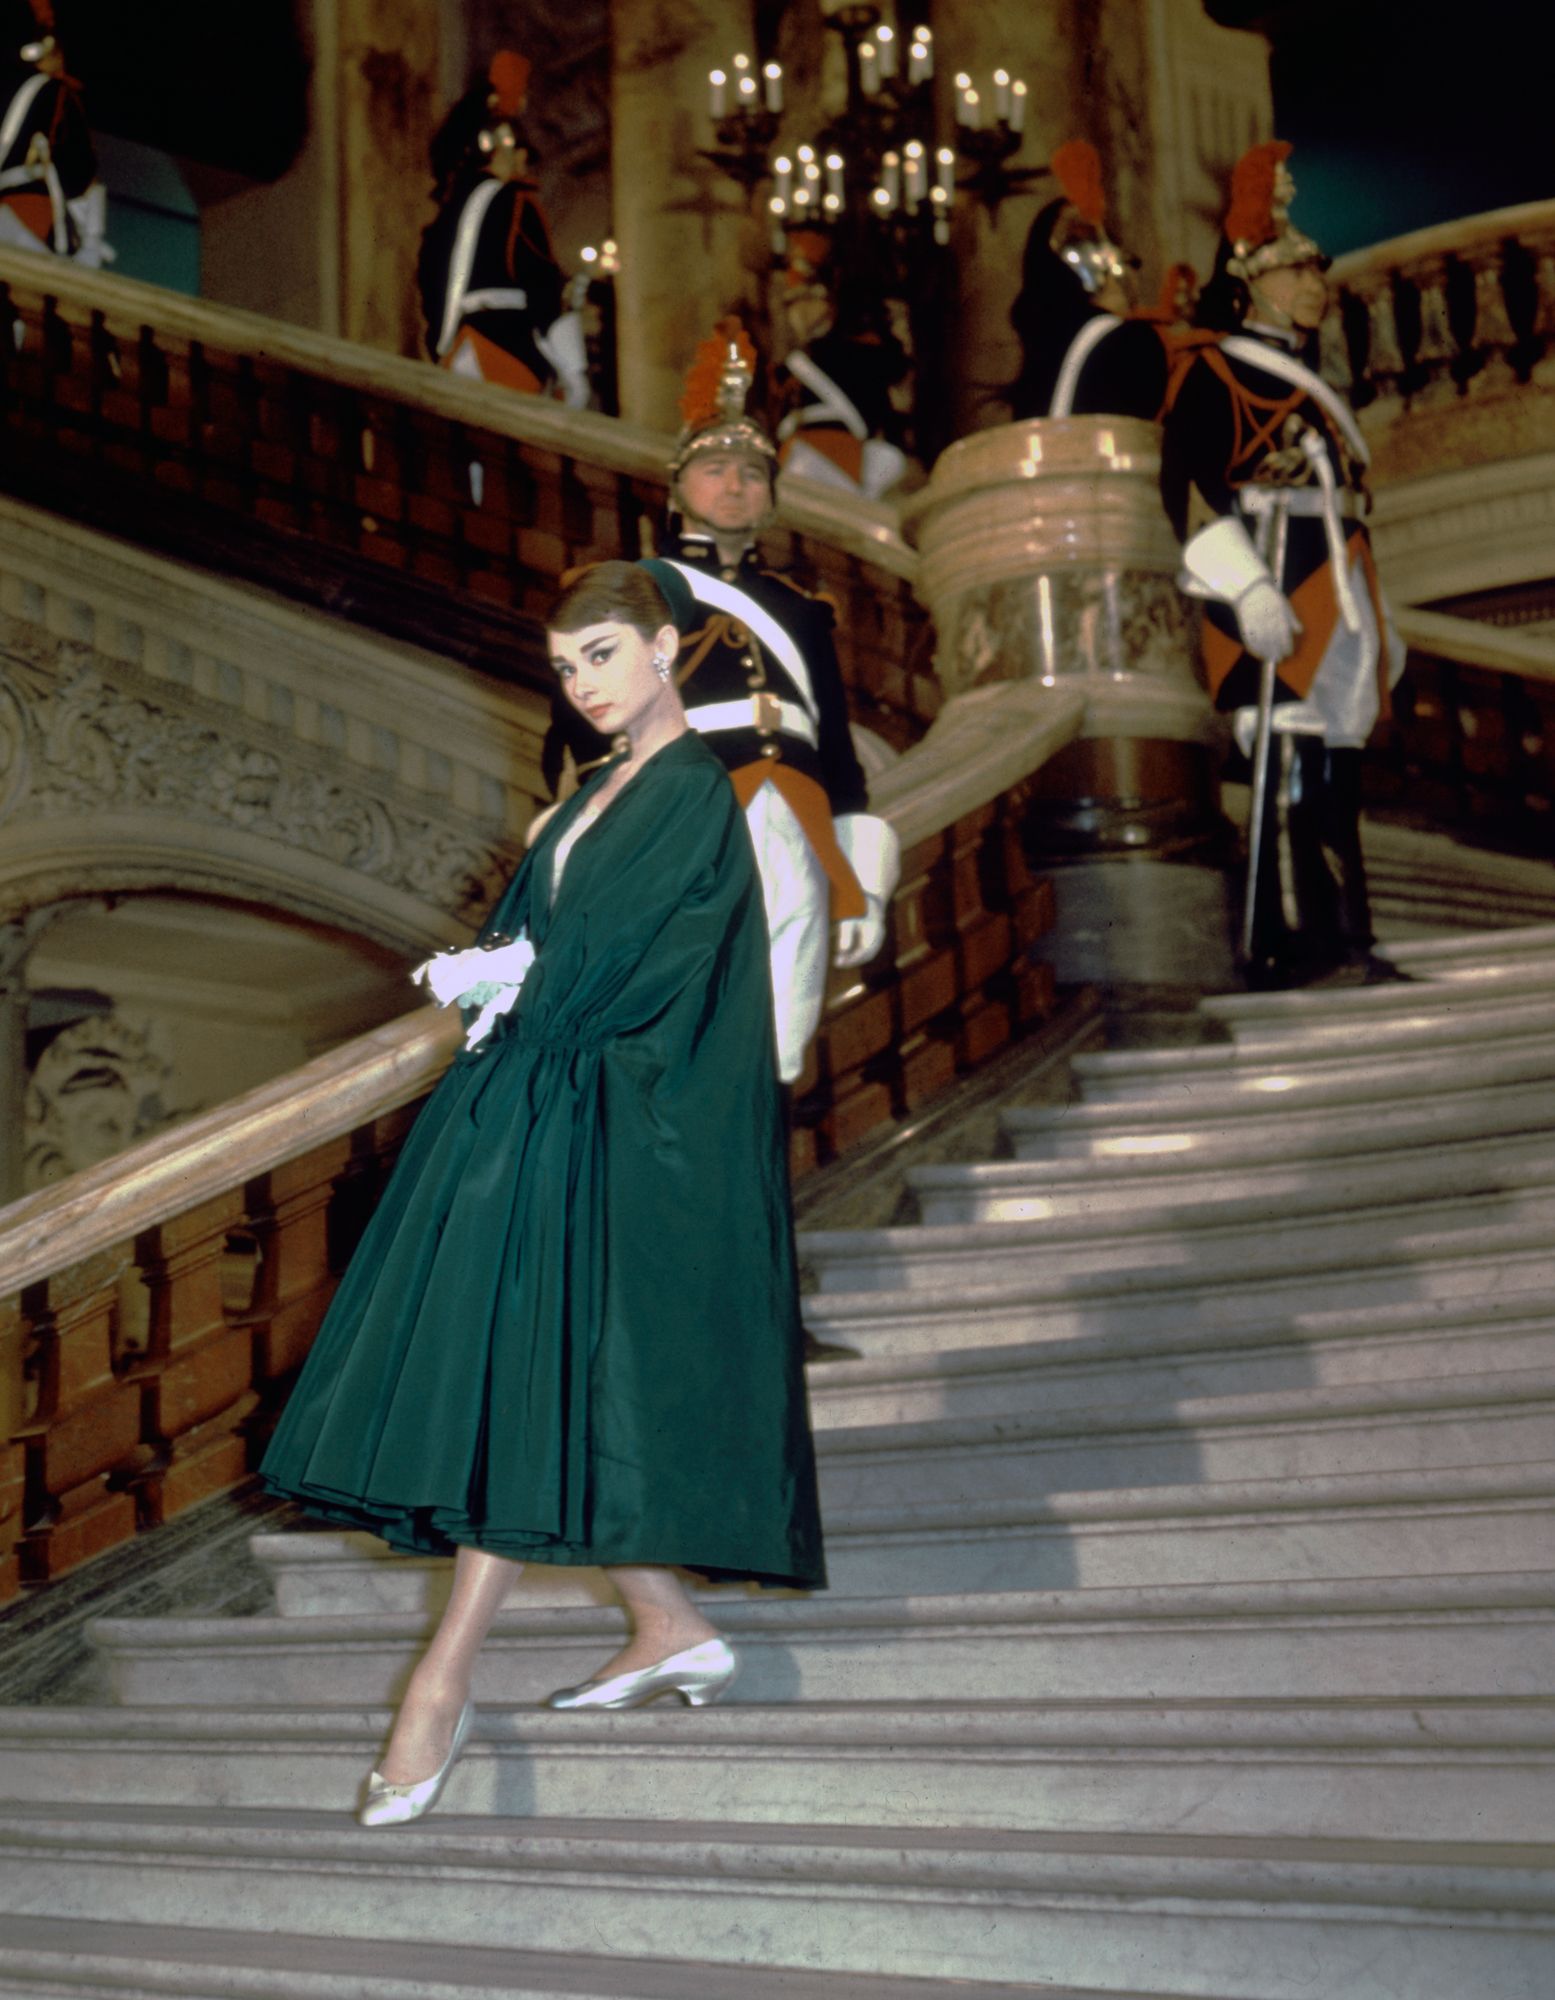 7 Classic Audrey Hepburn Givenchy Looks On Film